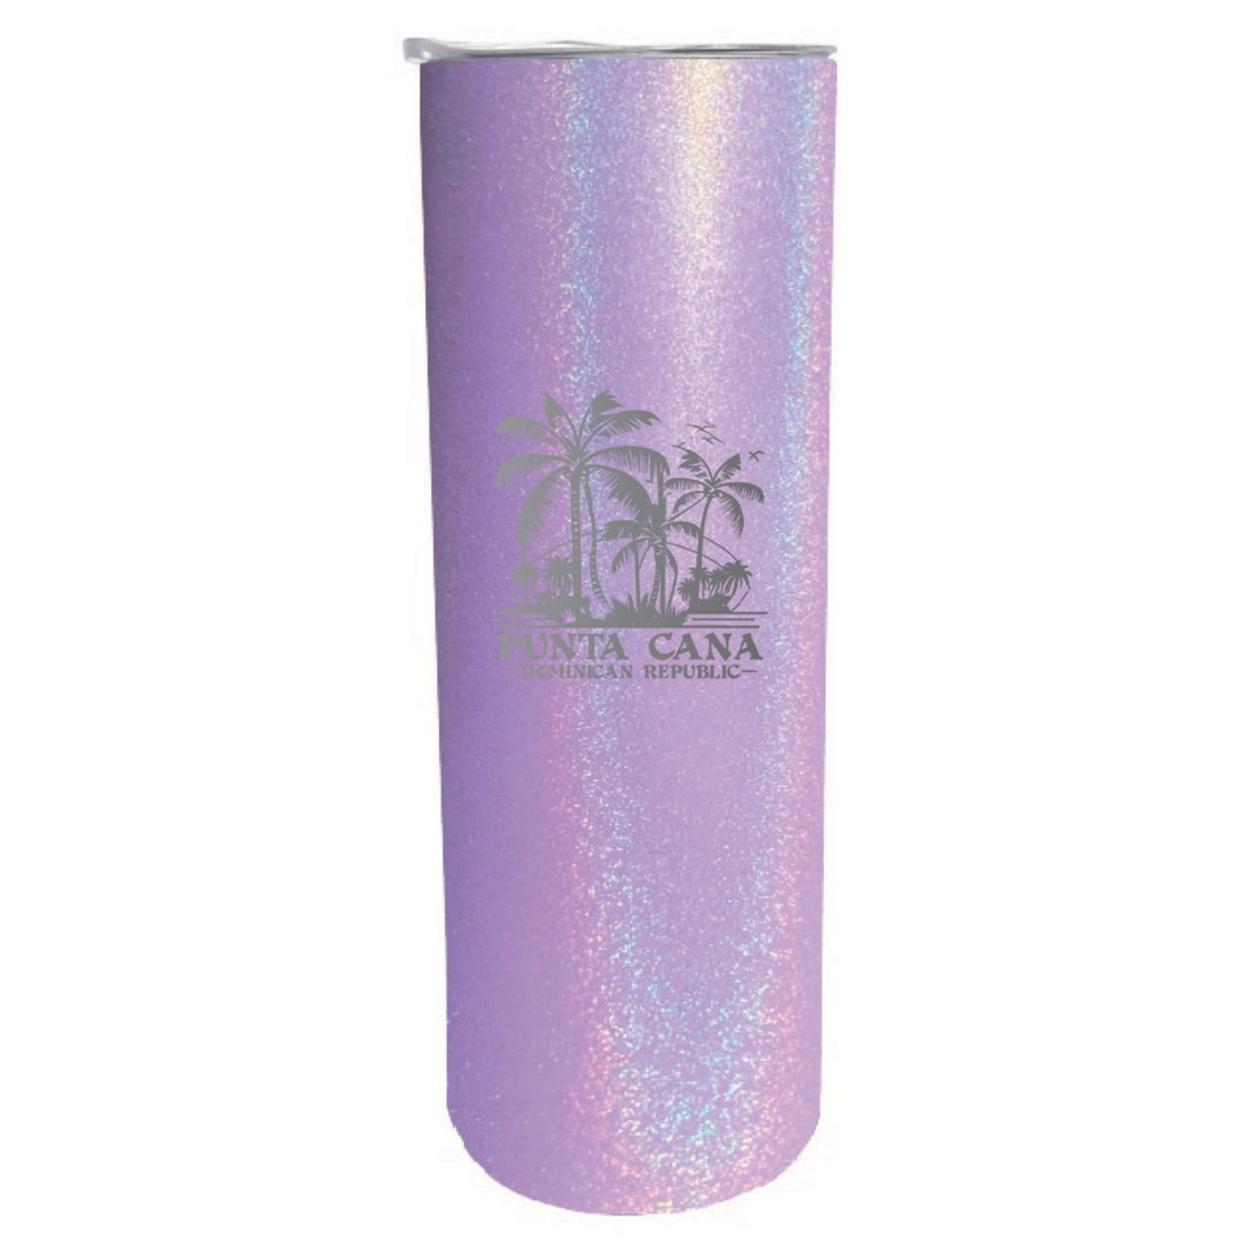 Punta Cana Dominican Republic Souvenir 20 Oz Insulated Stainless Steel Skinny Tumbler Etched - Rainbow Glitter Purple, PALMS